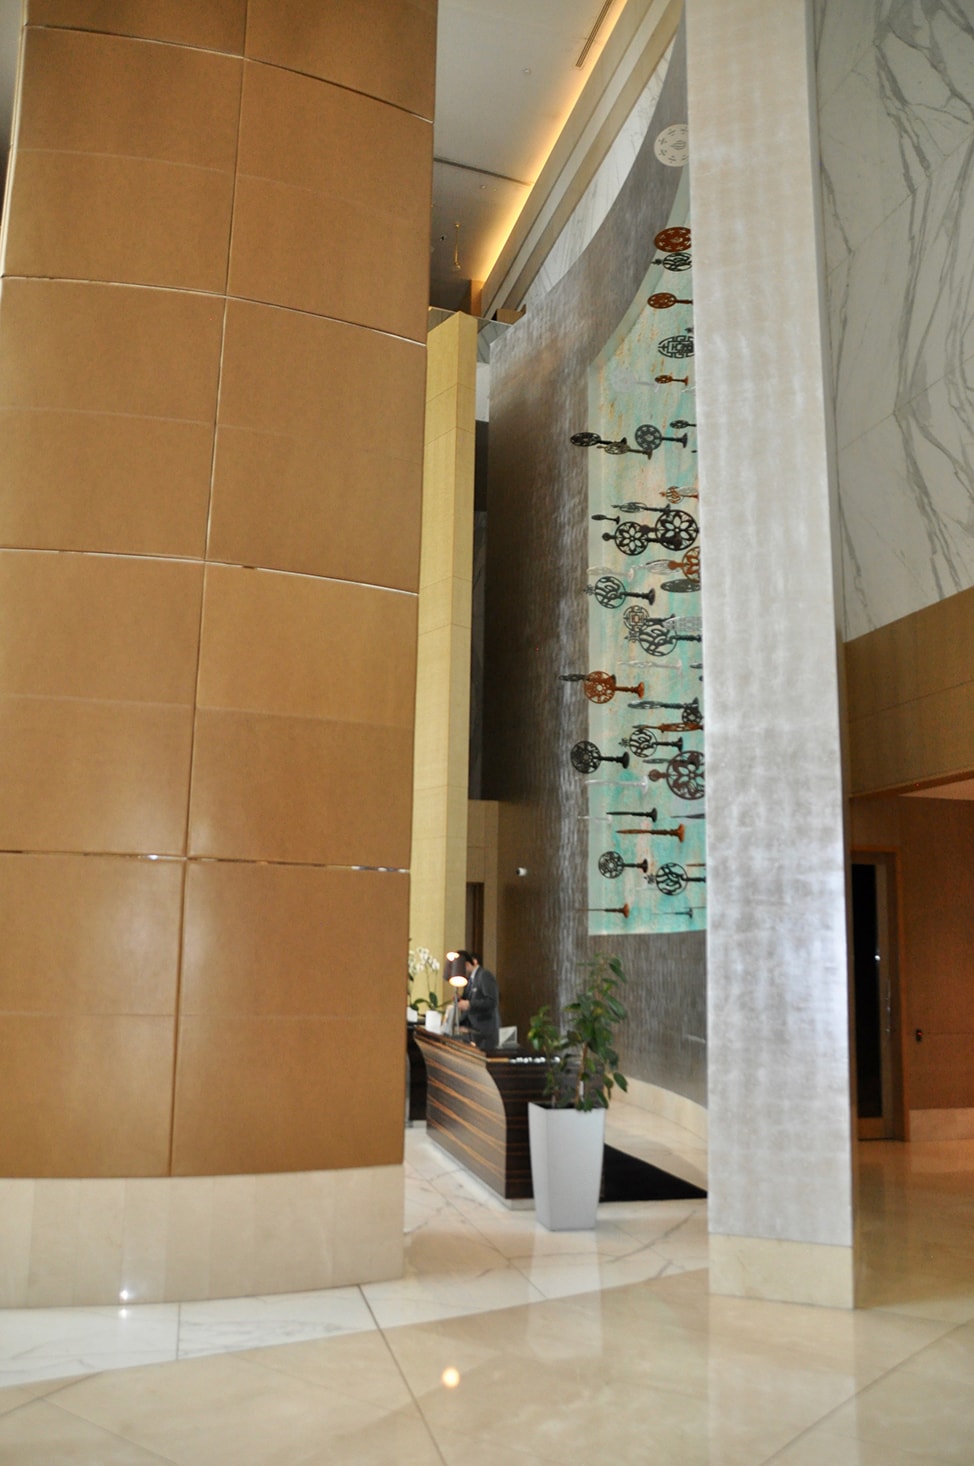 High ceilings in the Fairmont Baku lobby soar about the check in desk.